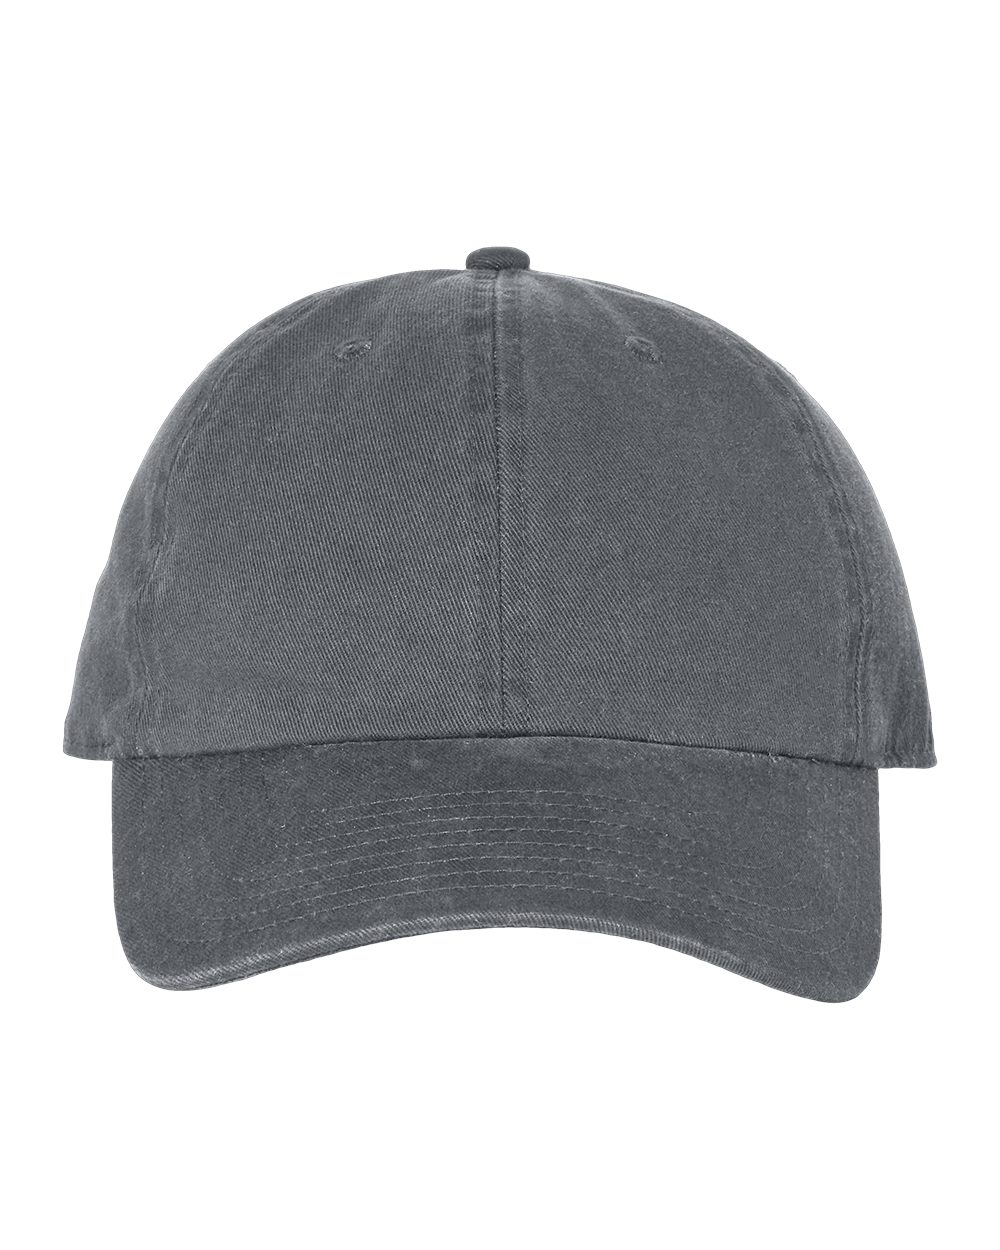 47 Blank Classic Clean Up Cap, Adjustable Plain Baseball Hat for Men and Women